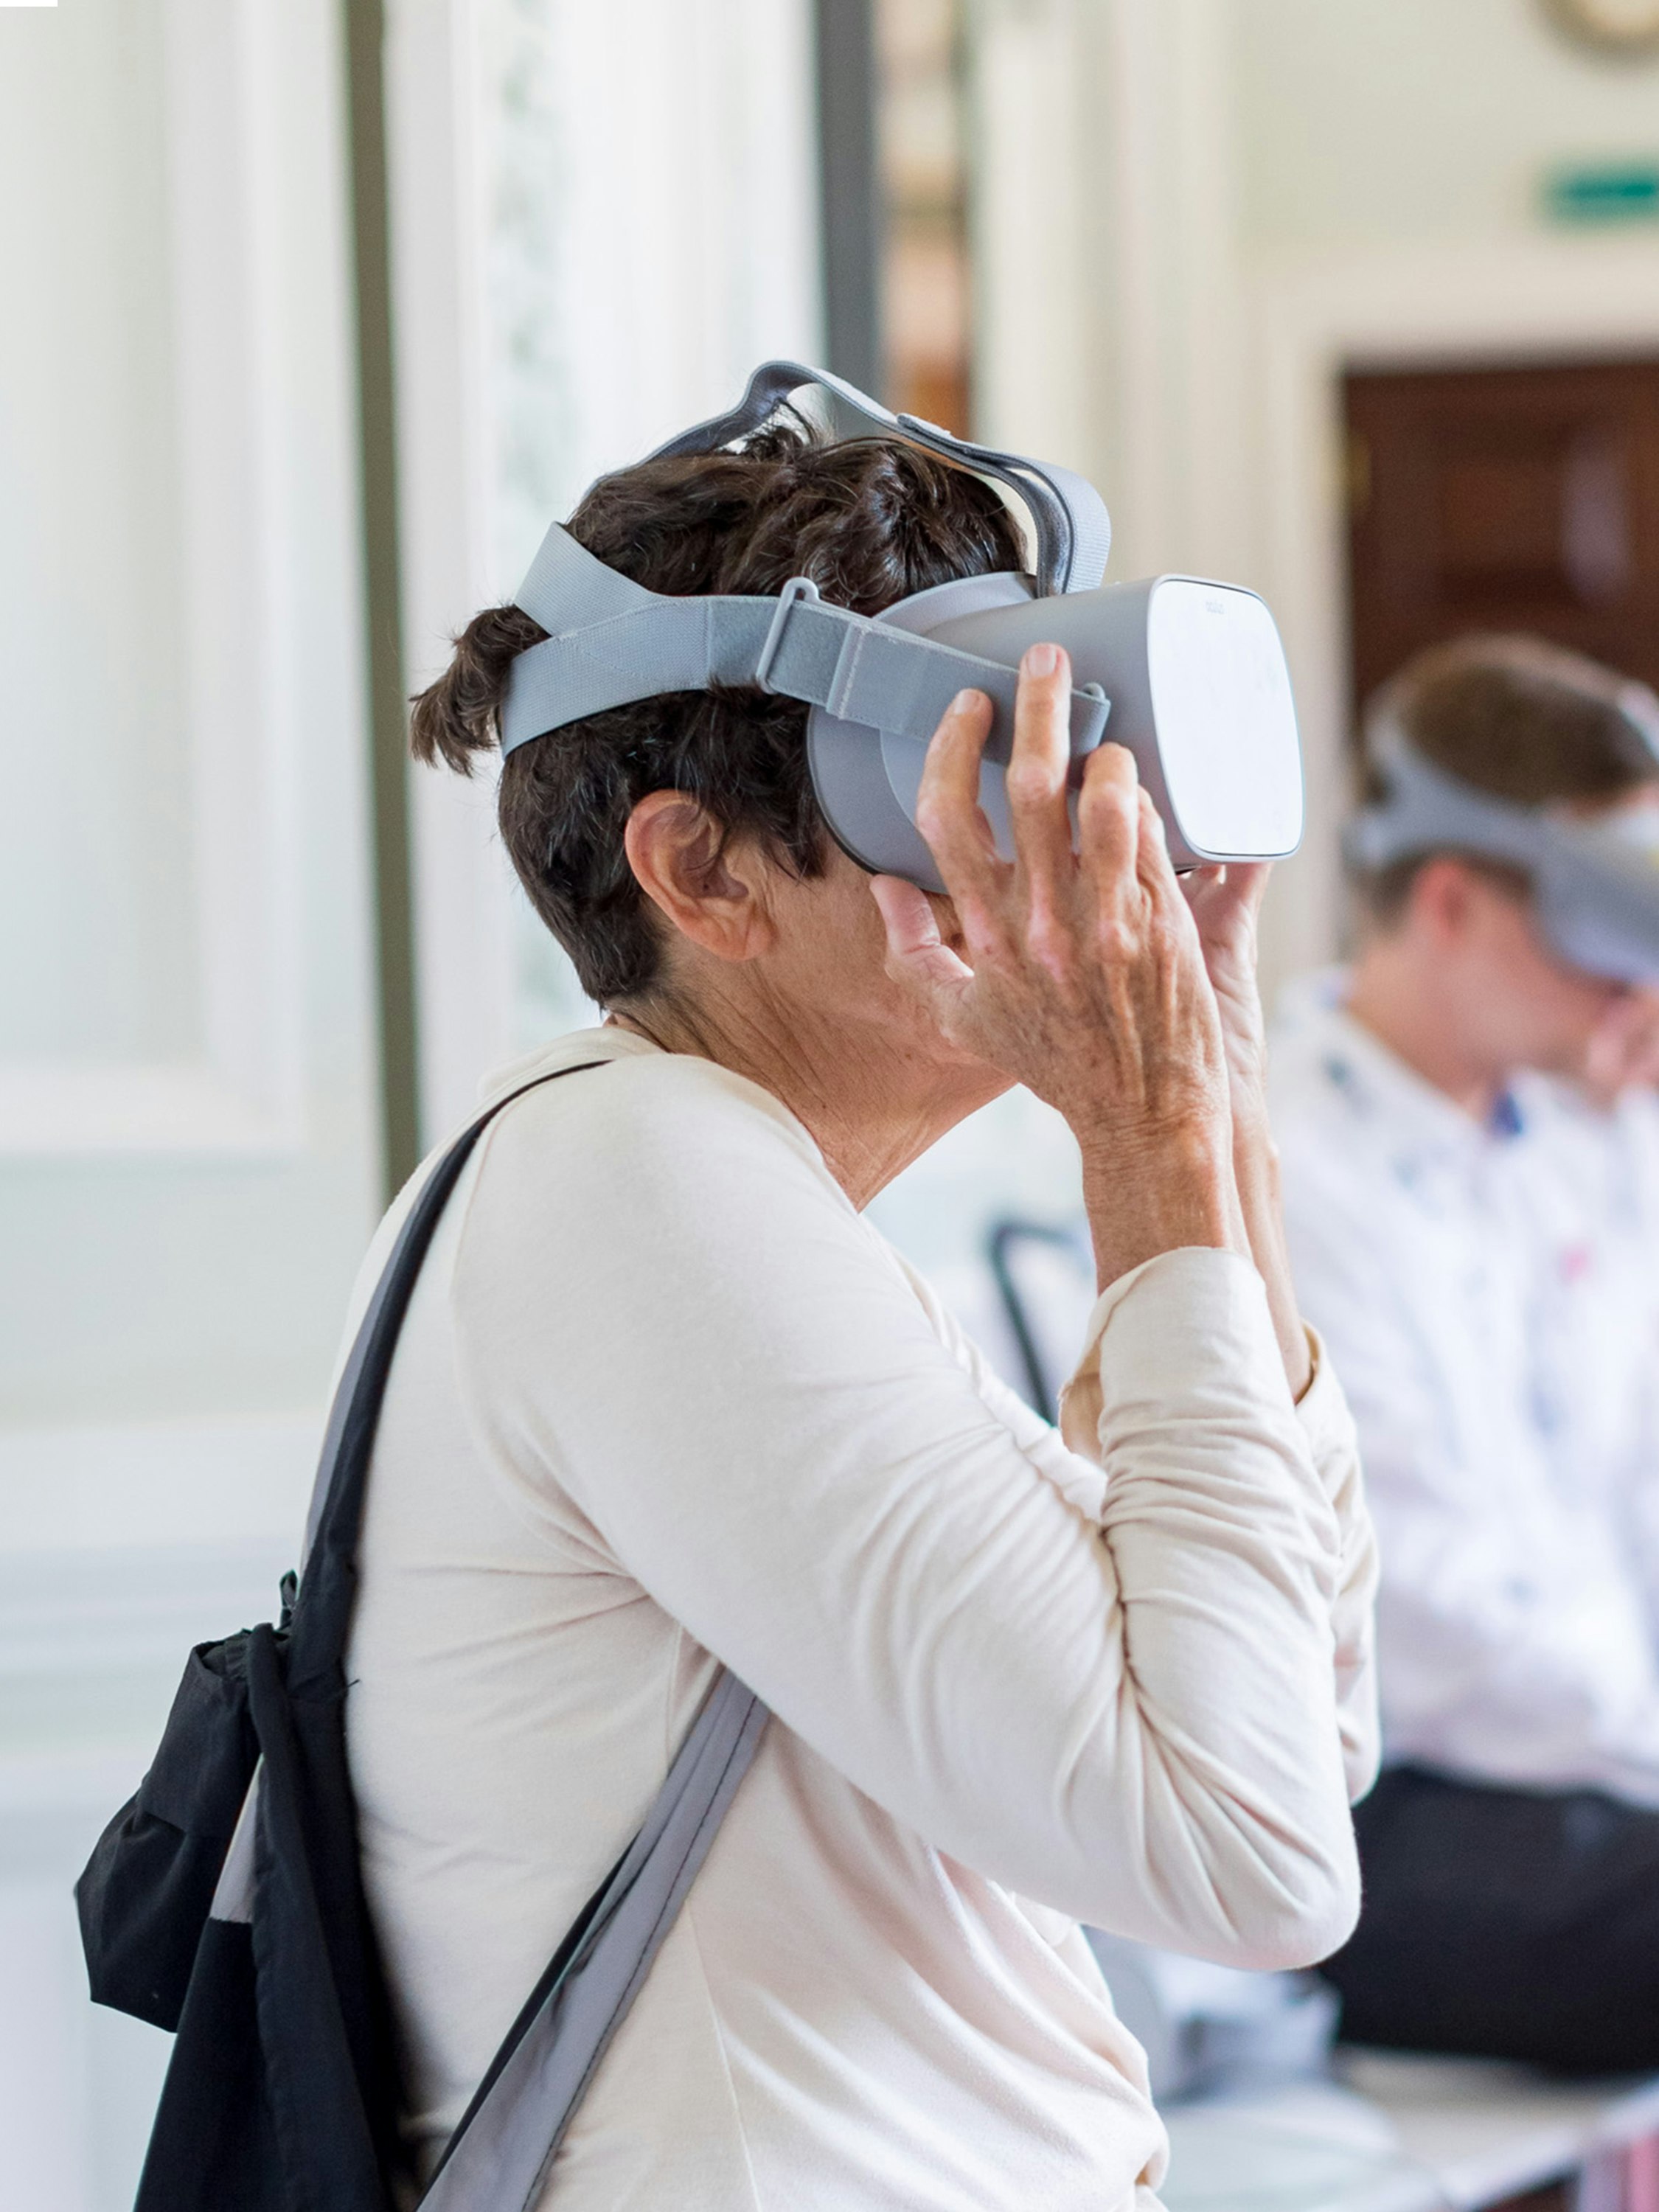 A virtual reality exhibit at the British Academy Summer Showcase in 2019.